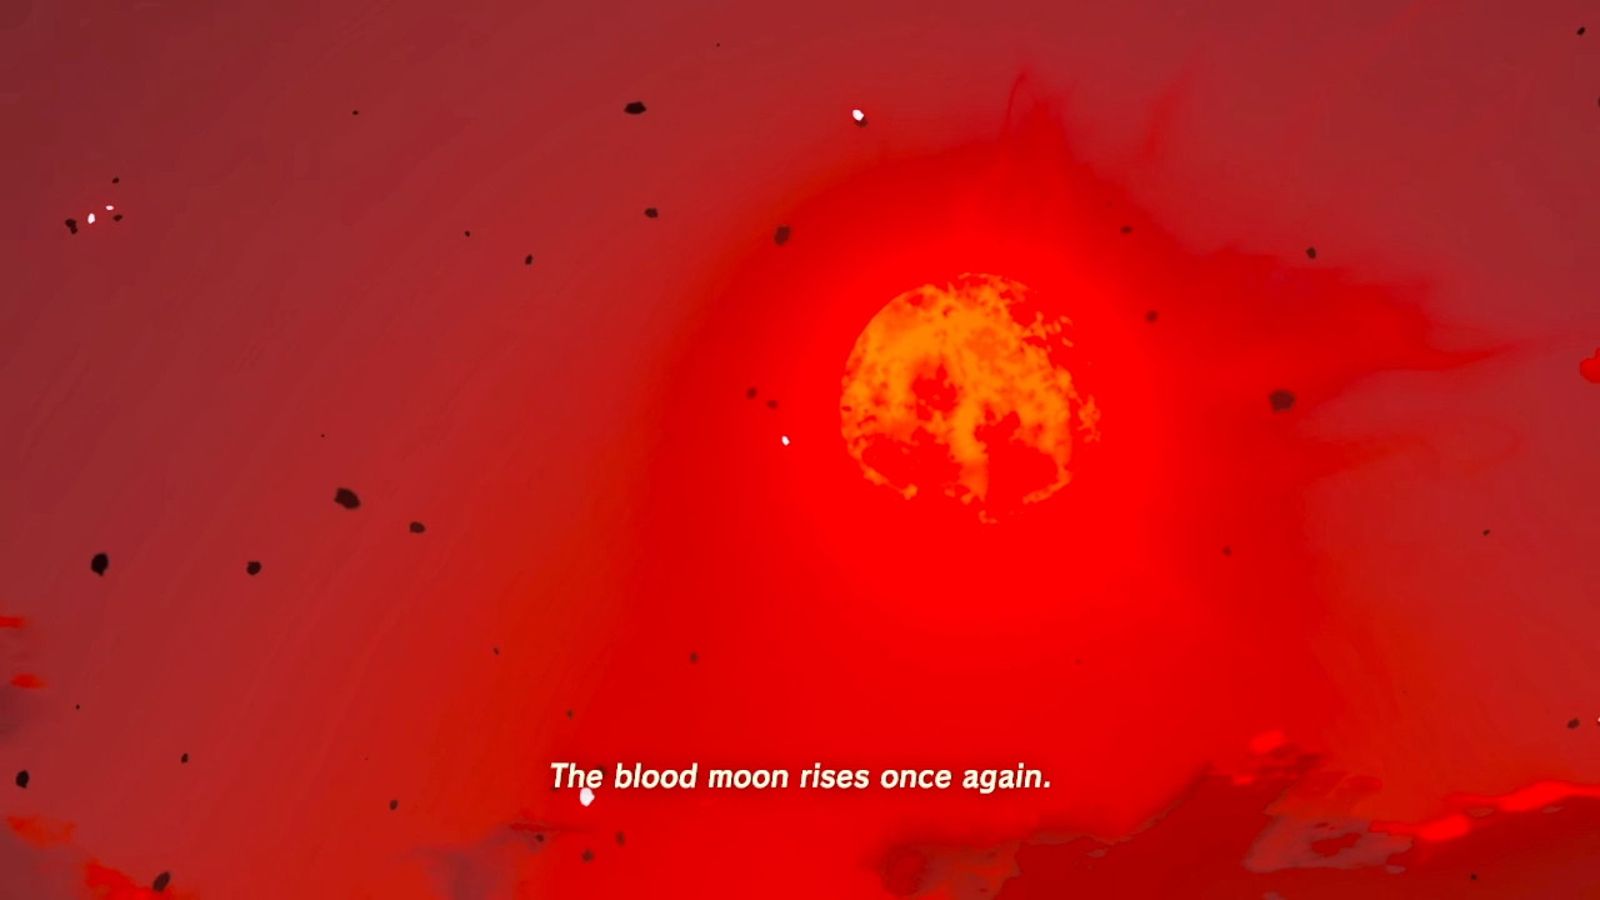 The Blood Moon rises in BOTW.